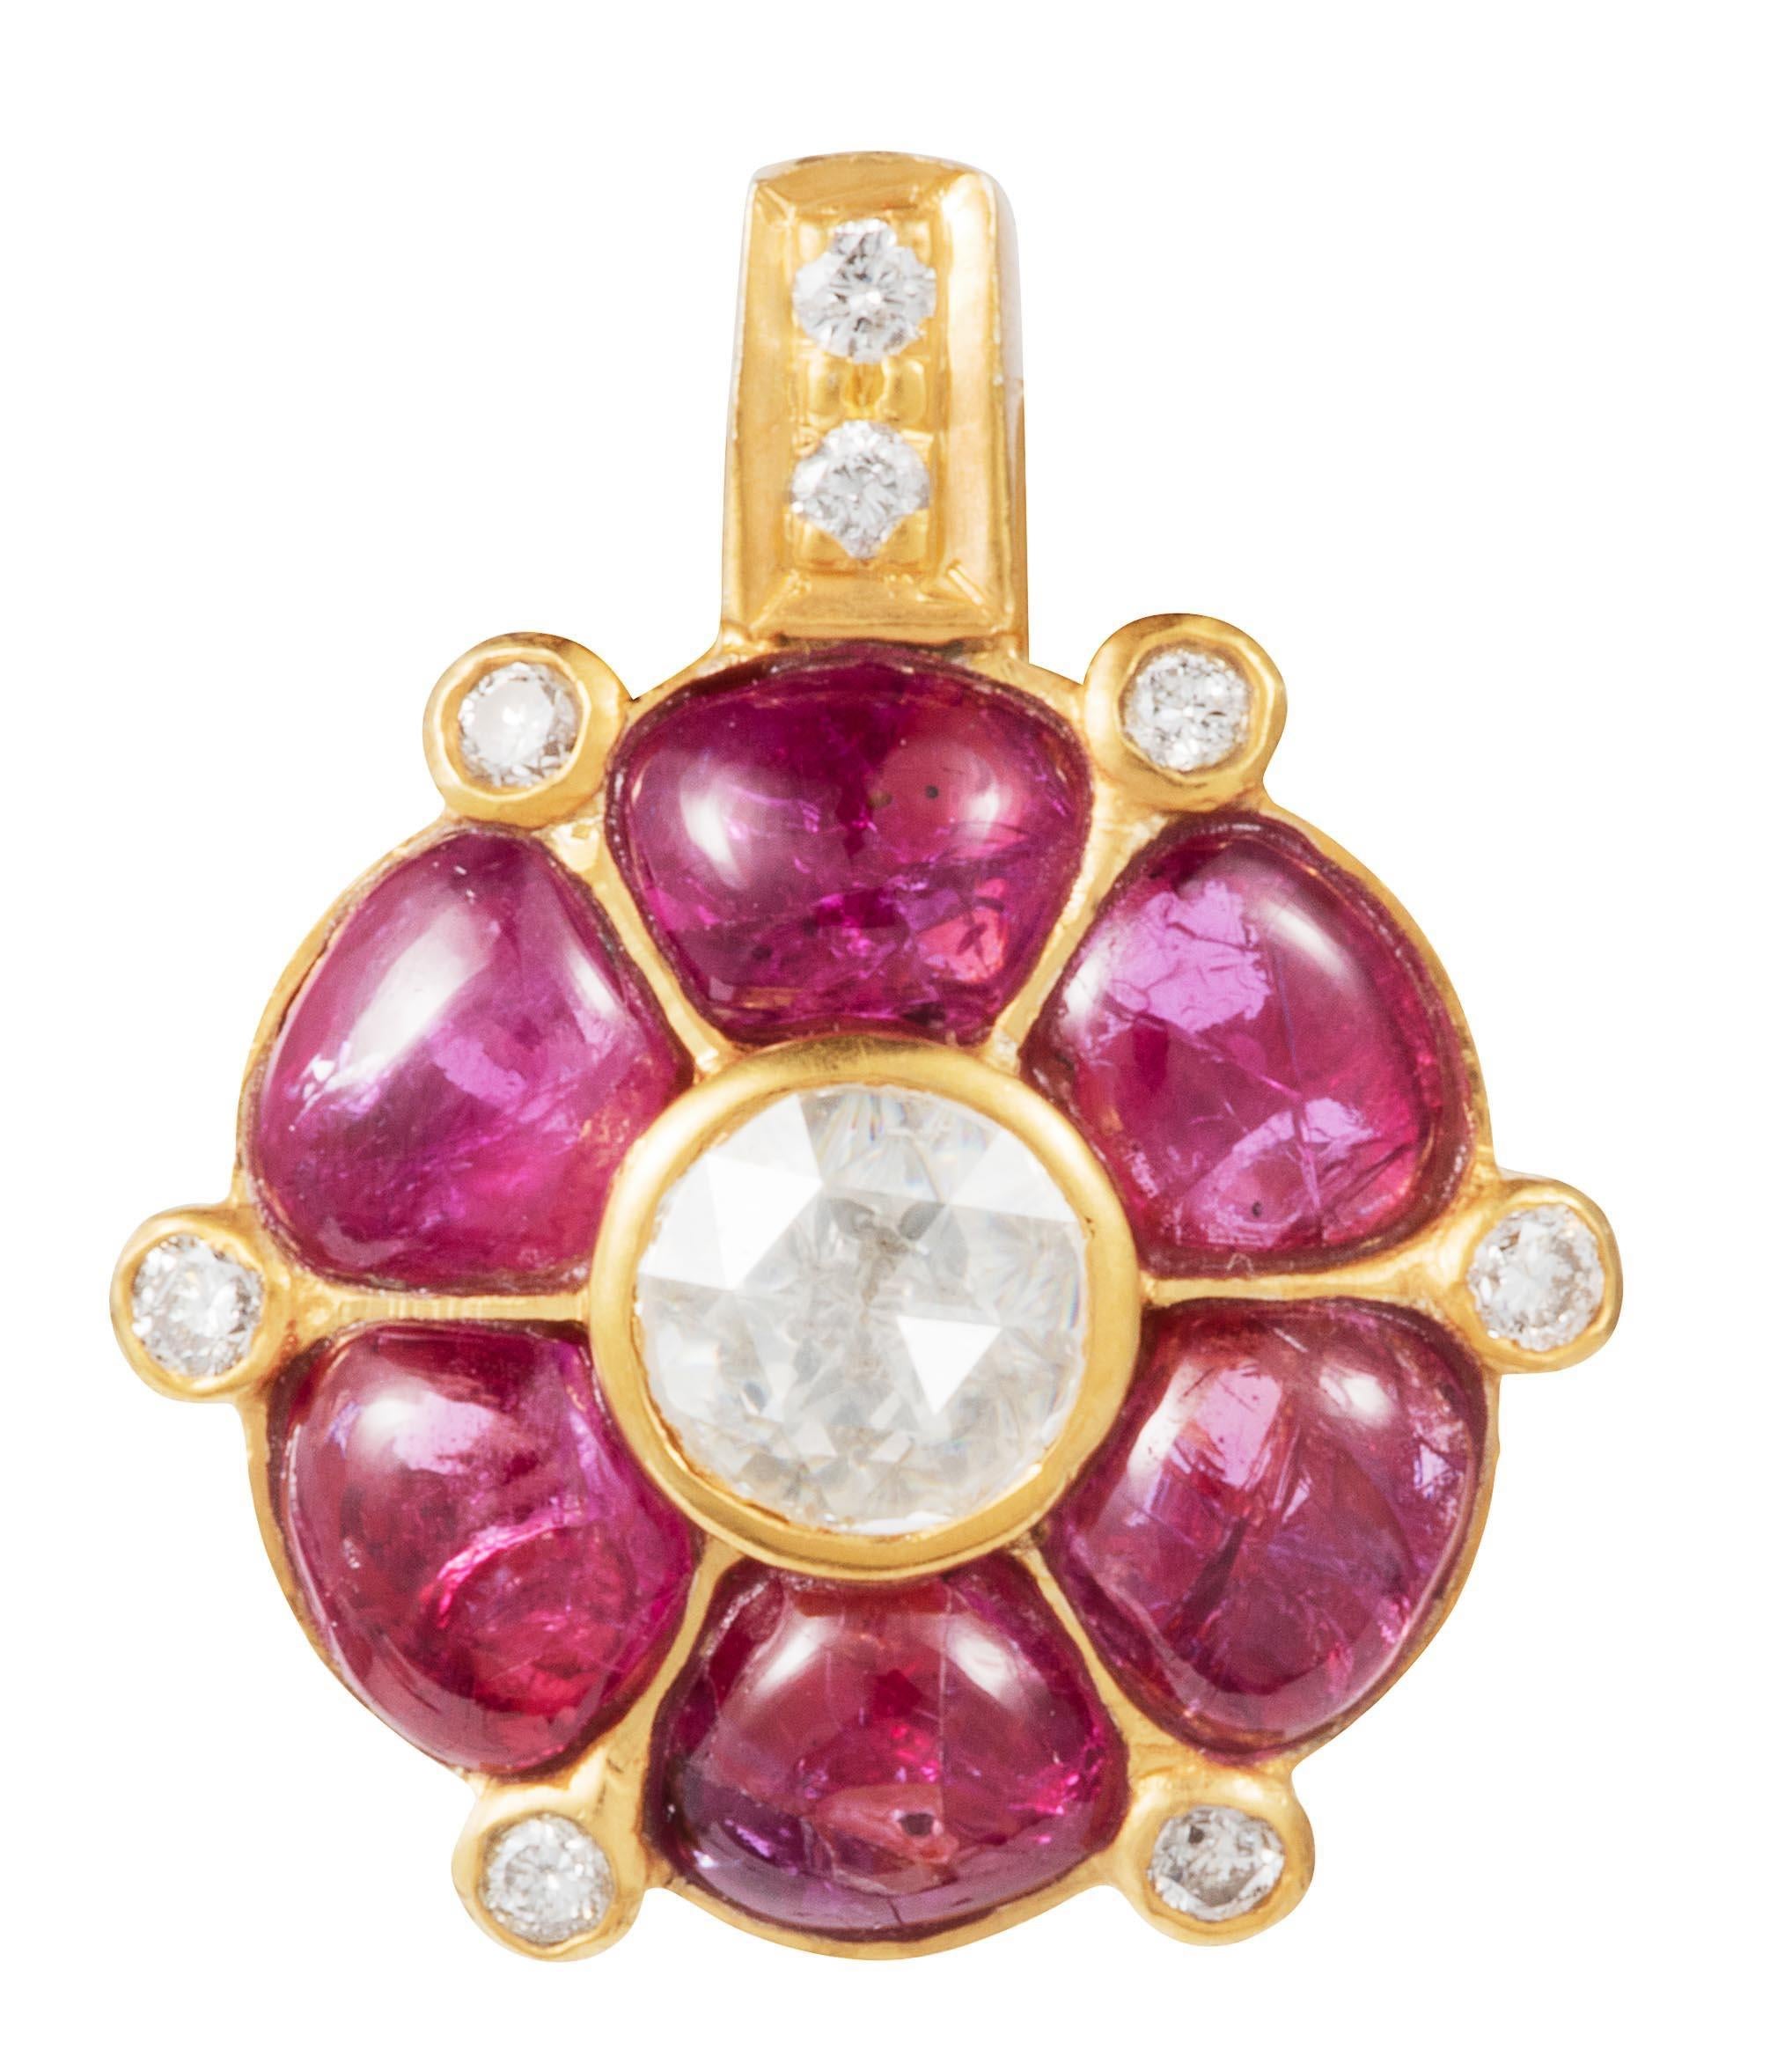 Diamond weight: 0.17 carats
Rose-Cut Diamond weight: 0.30 carats
Ruby weight: 3.53 carats

Bright rubies are interspersed with diamonds to create two lovely flower earrings.  Suspended from an 18k gold band studded with rose cut diamonds, these are